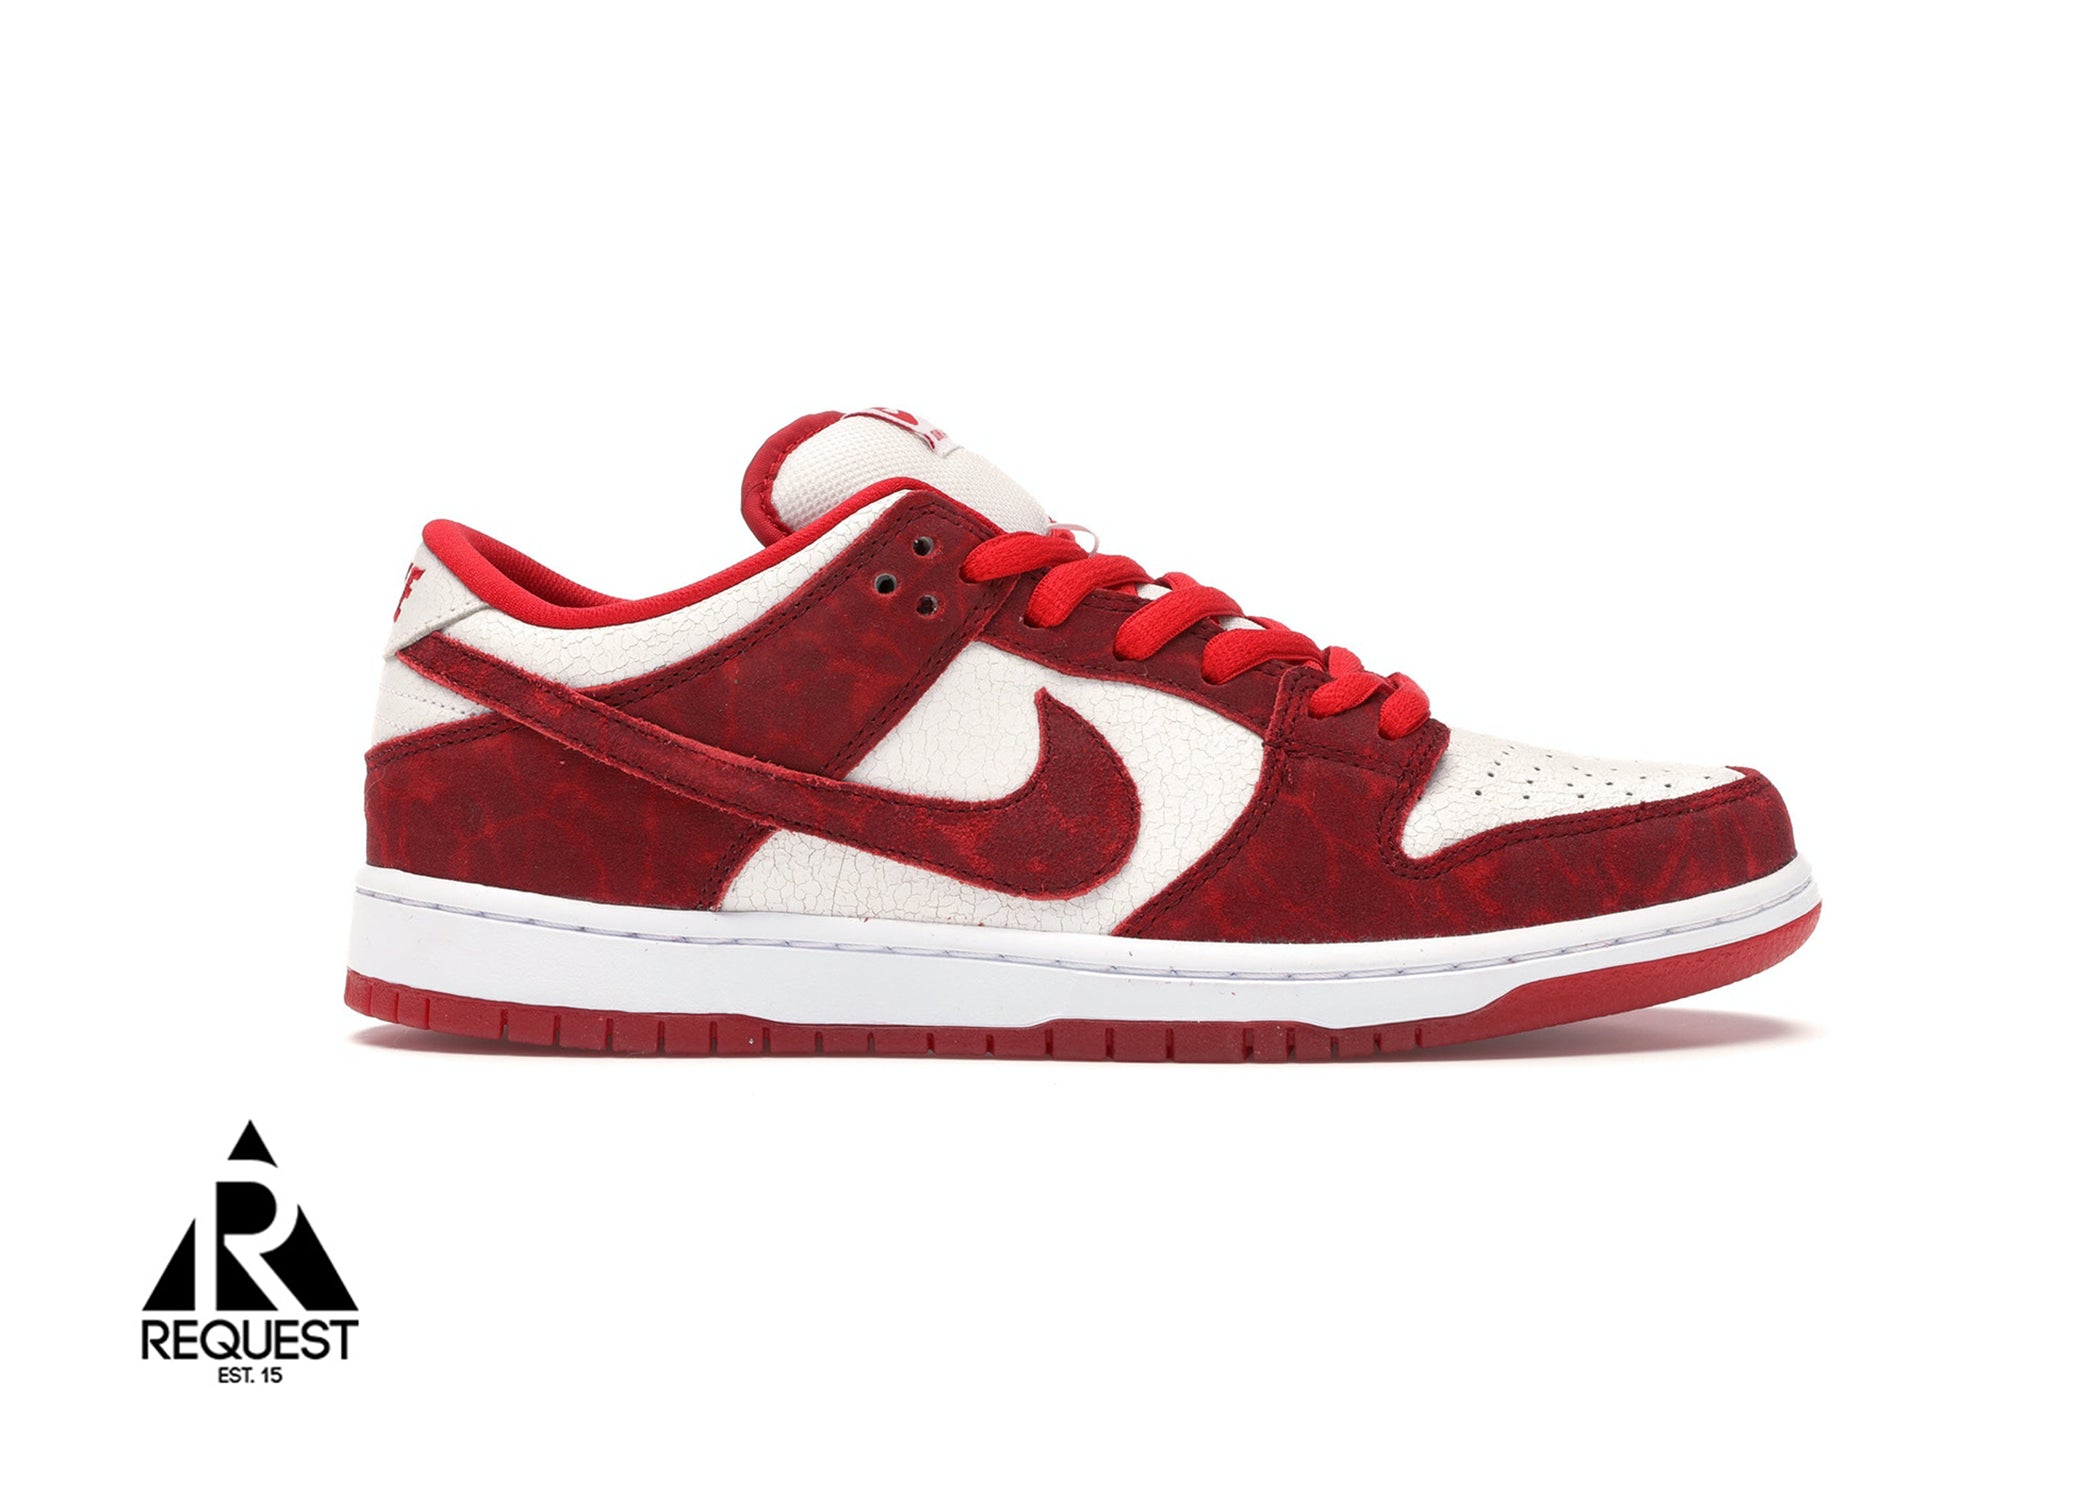 Nike Dunk SB Low “Valentines Day 2014”